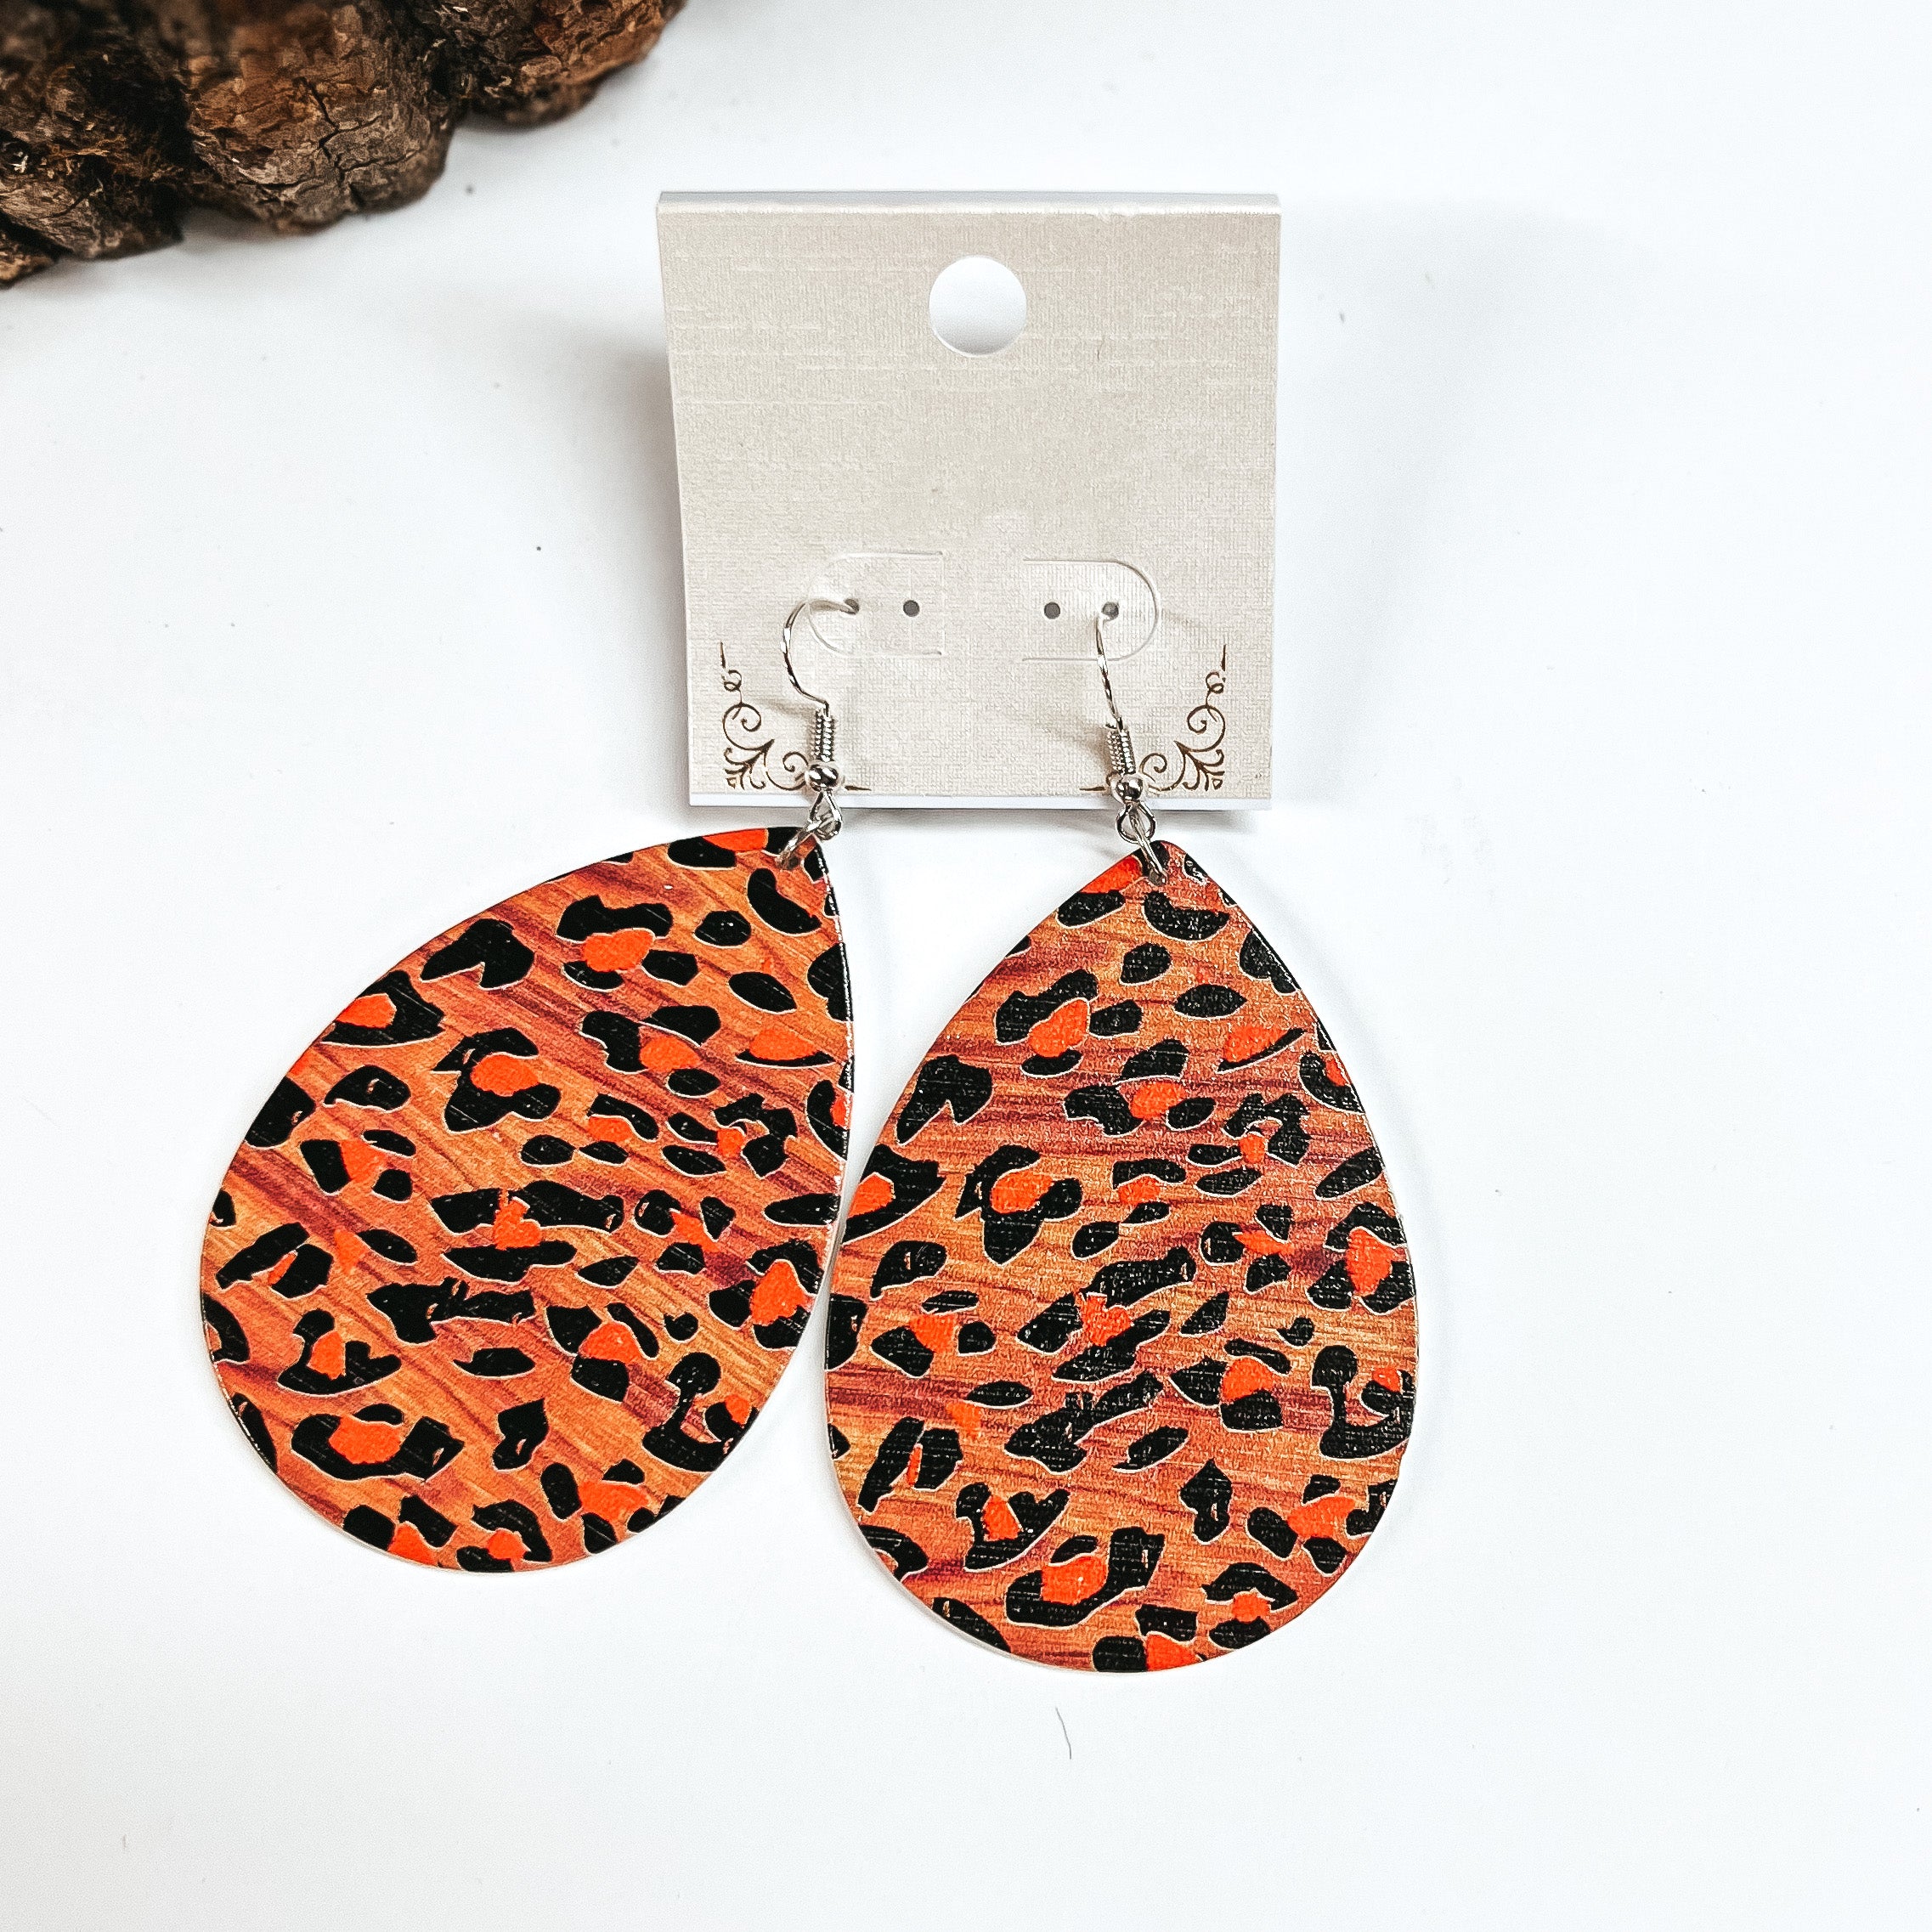 These are brown wooden teardrop earrings in leopard print and orange detailing. These earrings are placed on a white earring card holder, they are laying on a  white background with a slab of wood in the back as decor.